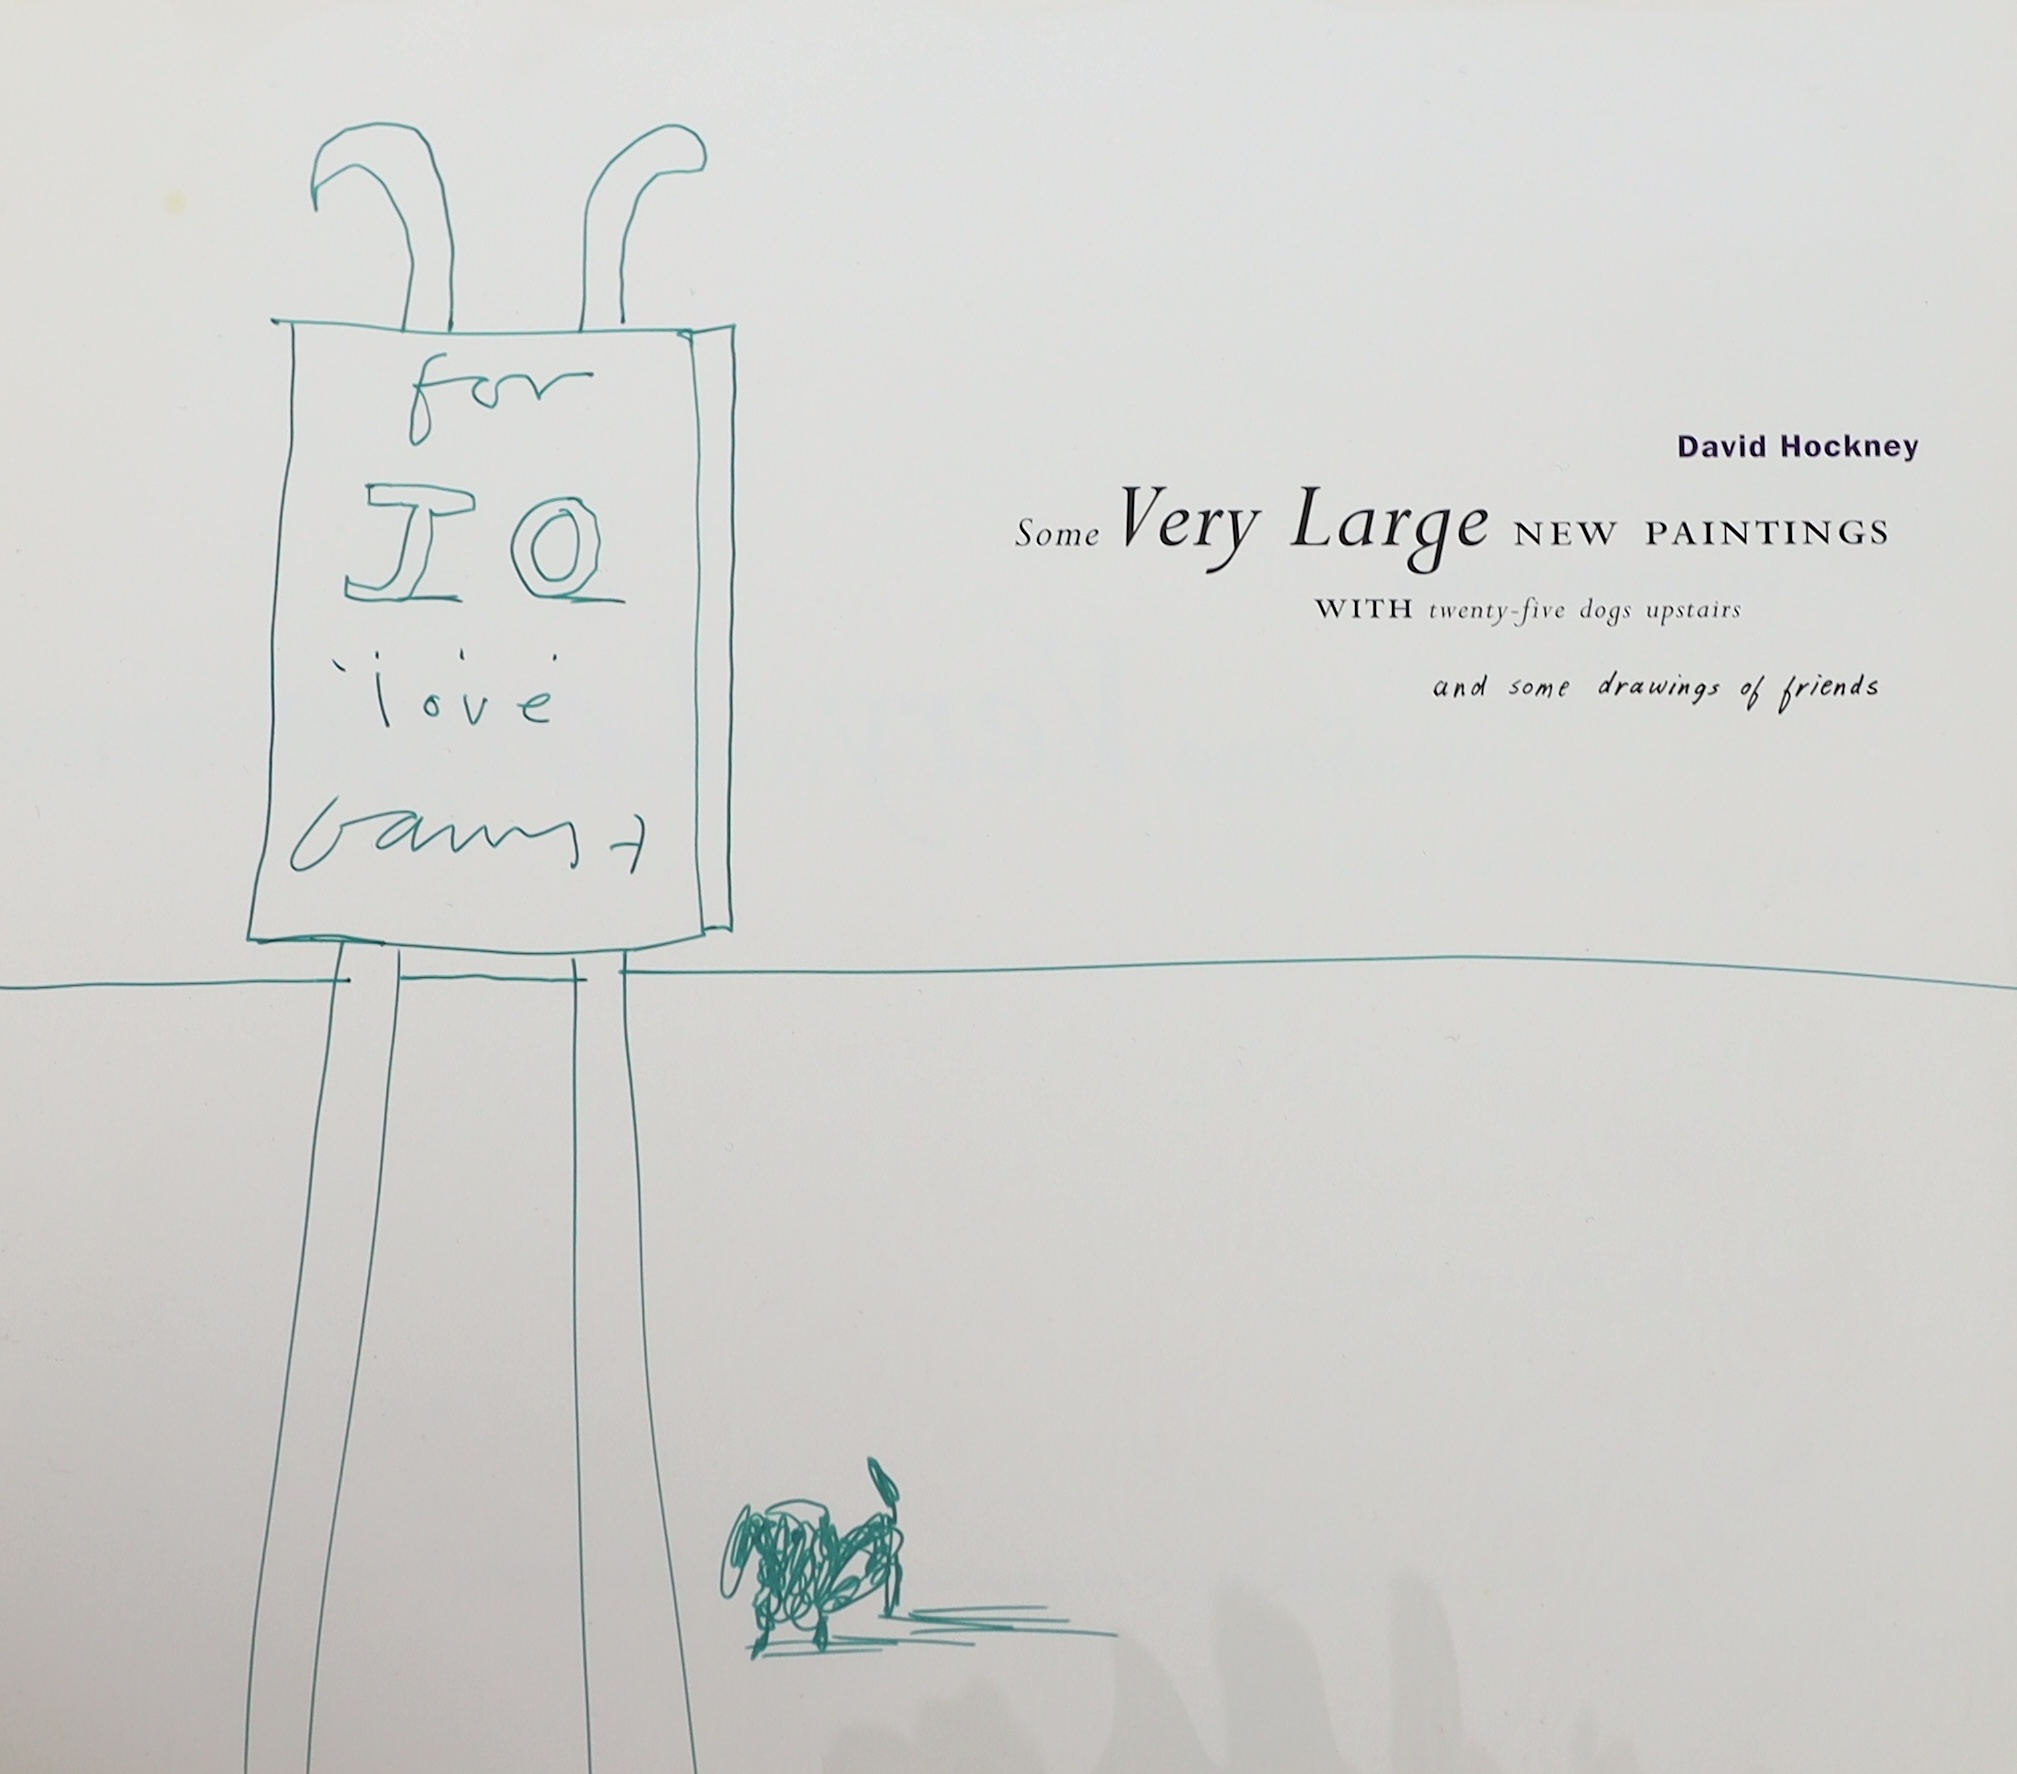 David Hockney (English, b.1937), 'Some very large new paintings with 25 dogs upstairs', Exhibition catalogue for L.A. Louver May 1995, overall 21.5 x 25.5cm